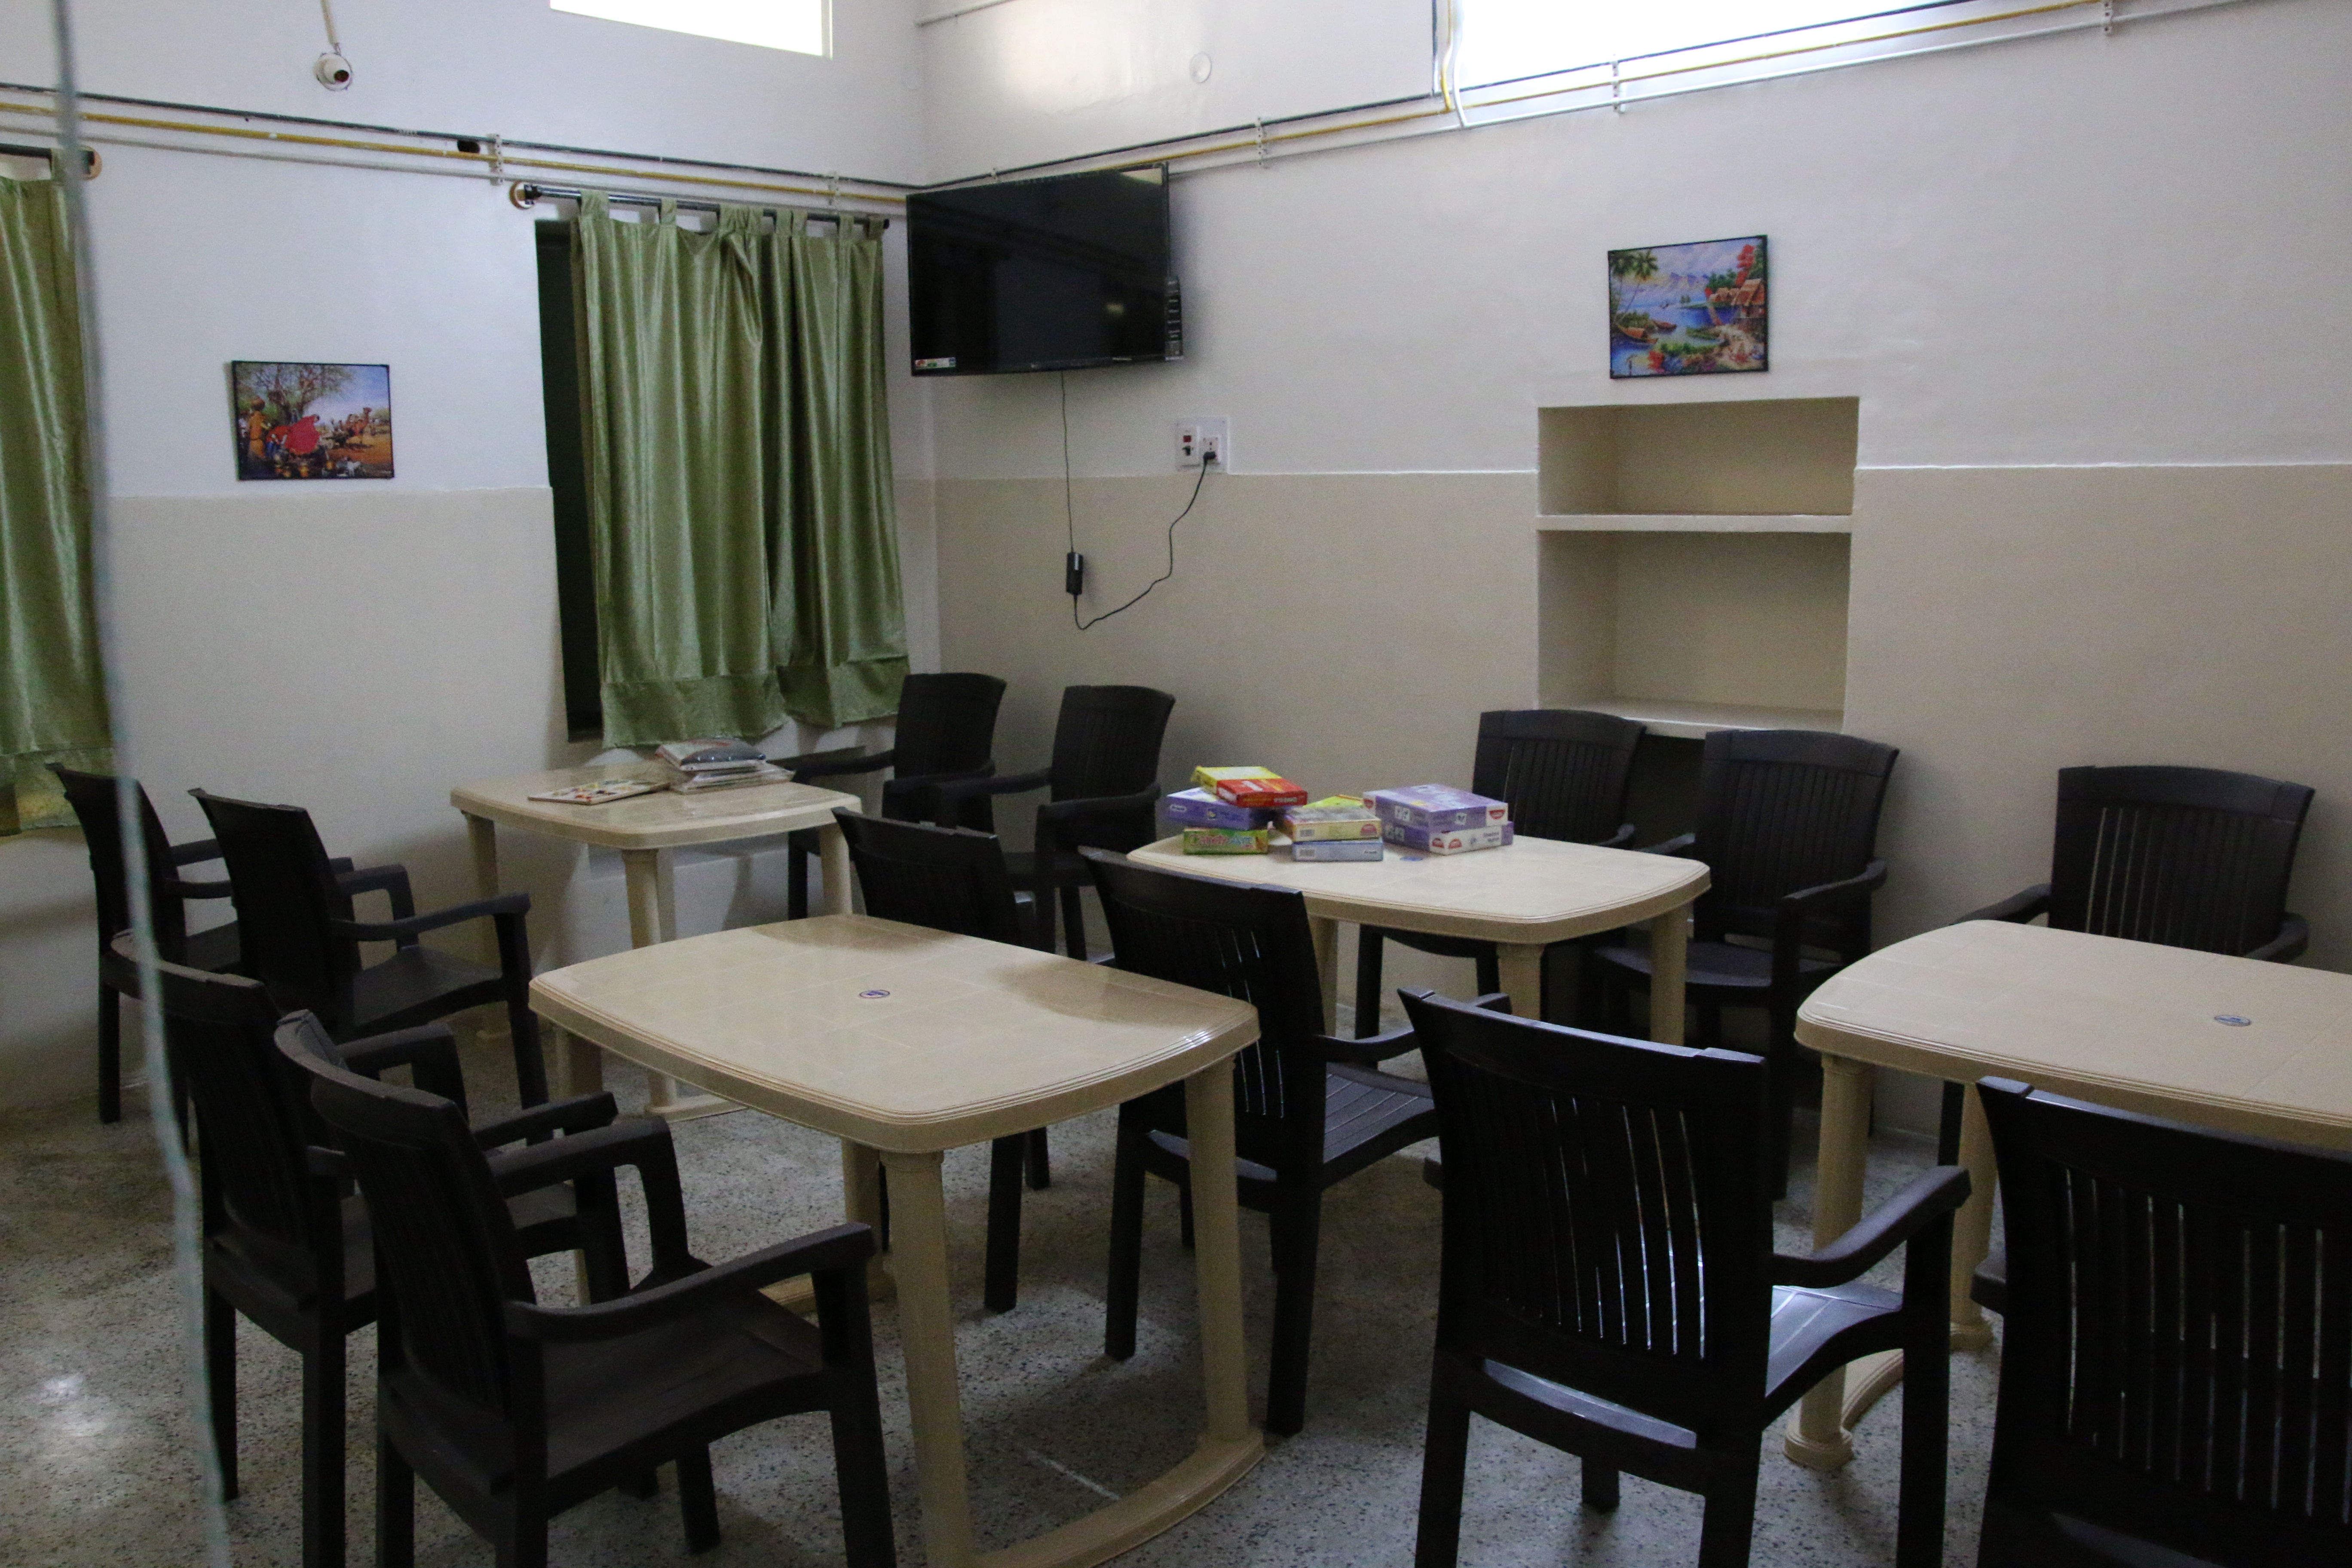 Activity cum dining space at the Ground floor of NMT's Residential Care Centre at Kolar